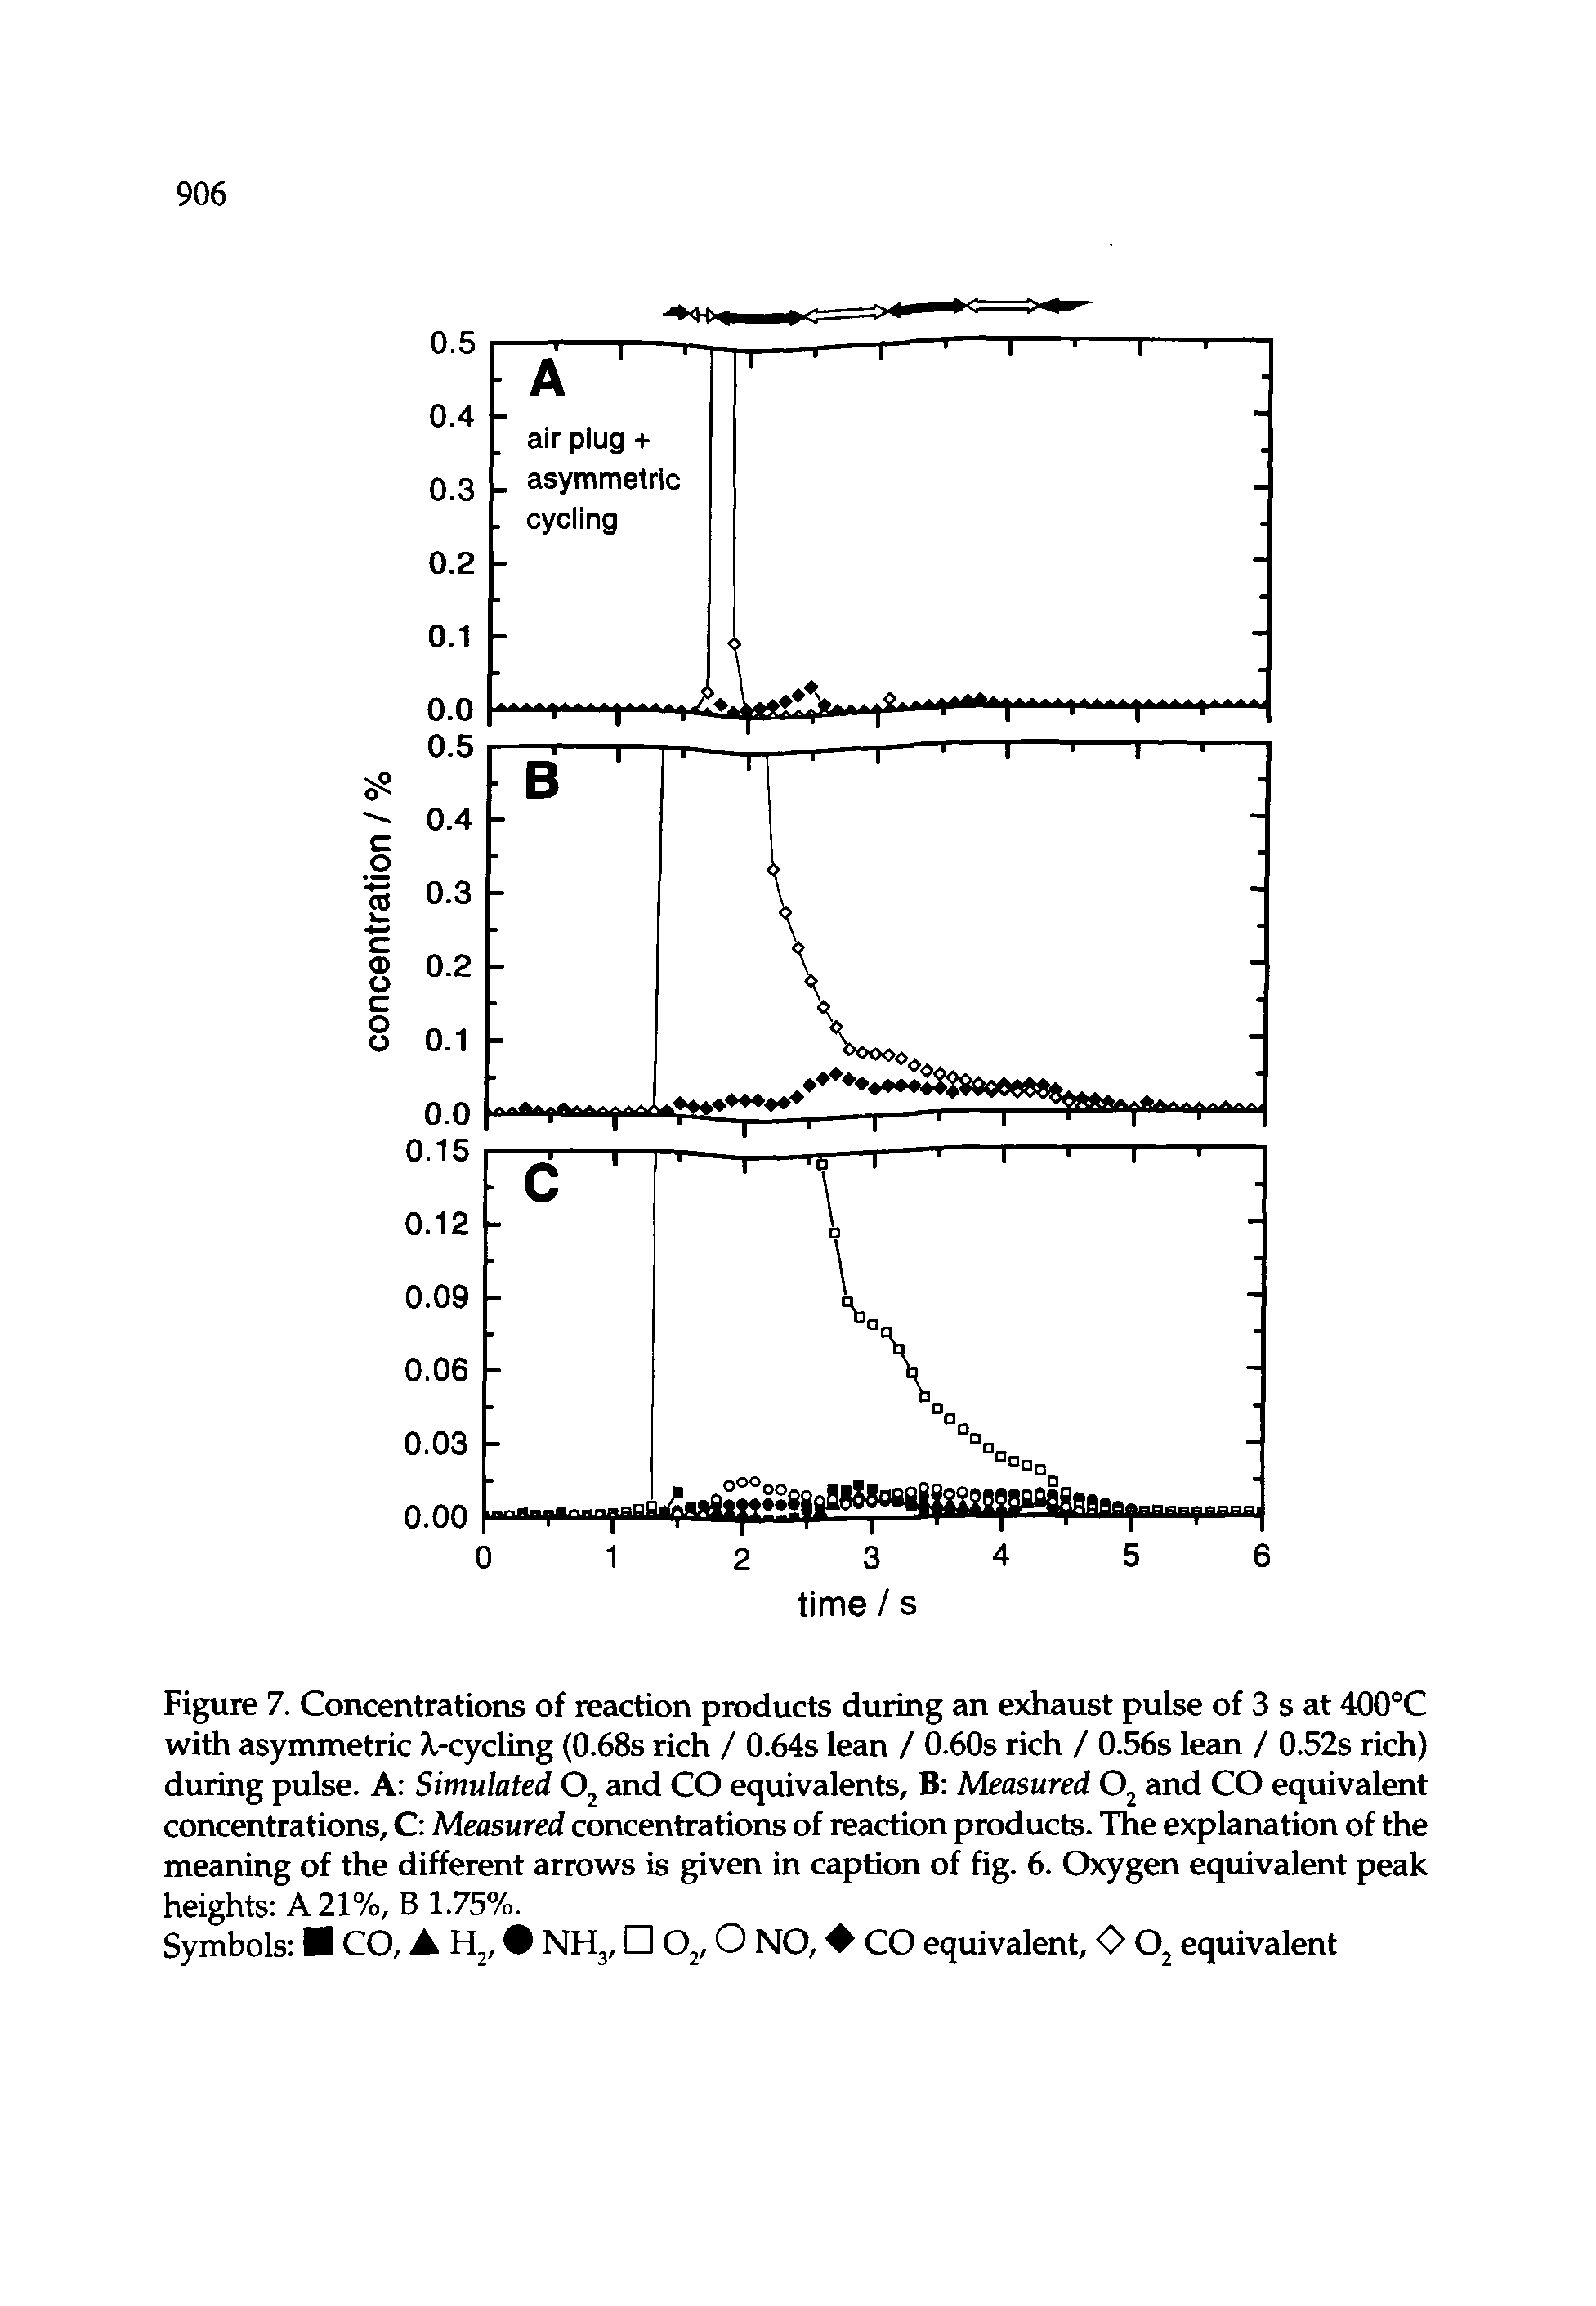 Figure 7. Concentrations of reaction products during an exhaust pulse of 3 s at 400°C with asymmetric A.-cycling (0.68s rich / 0.64s lean / 0.60s rich / 0.56s lean / 0.52s rich) during pulse. A Simulated and CO equivalents, B Measured and CO equivalent concentrations, C Measured concentrations of reaction products. The explanation of the meaning of the different arrows is given in caption of fig. 6. Oxygen equivalent peak heights A 21%, B 1.75%.